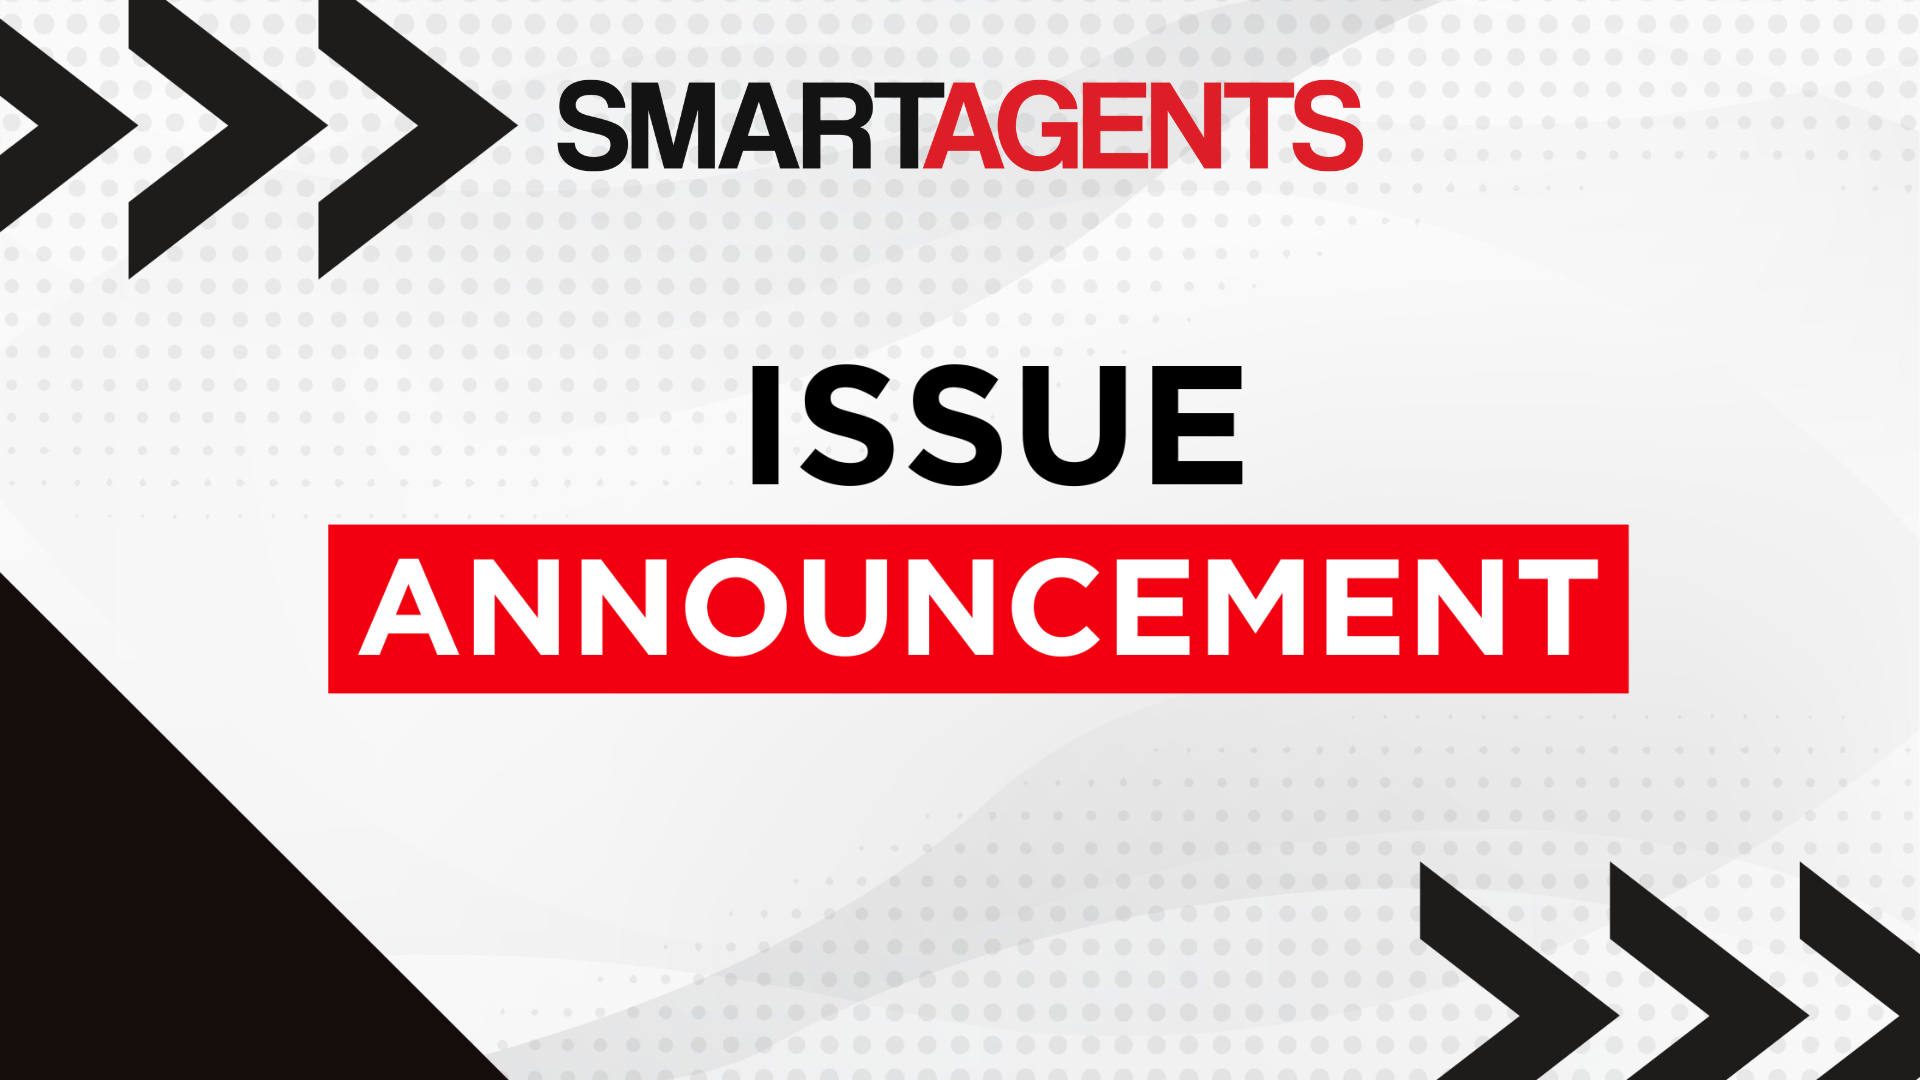 Just Published! The New & Improved Smart Agents Magazine!